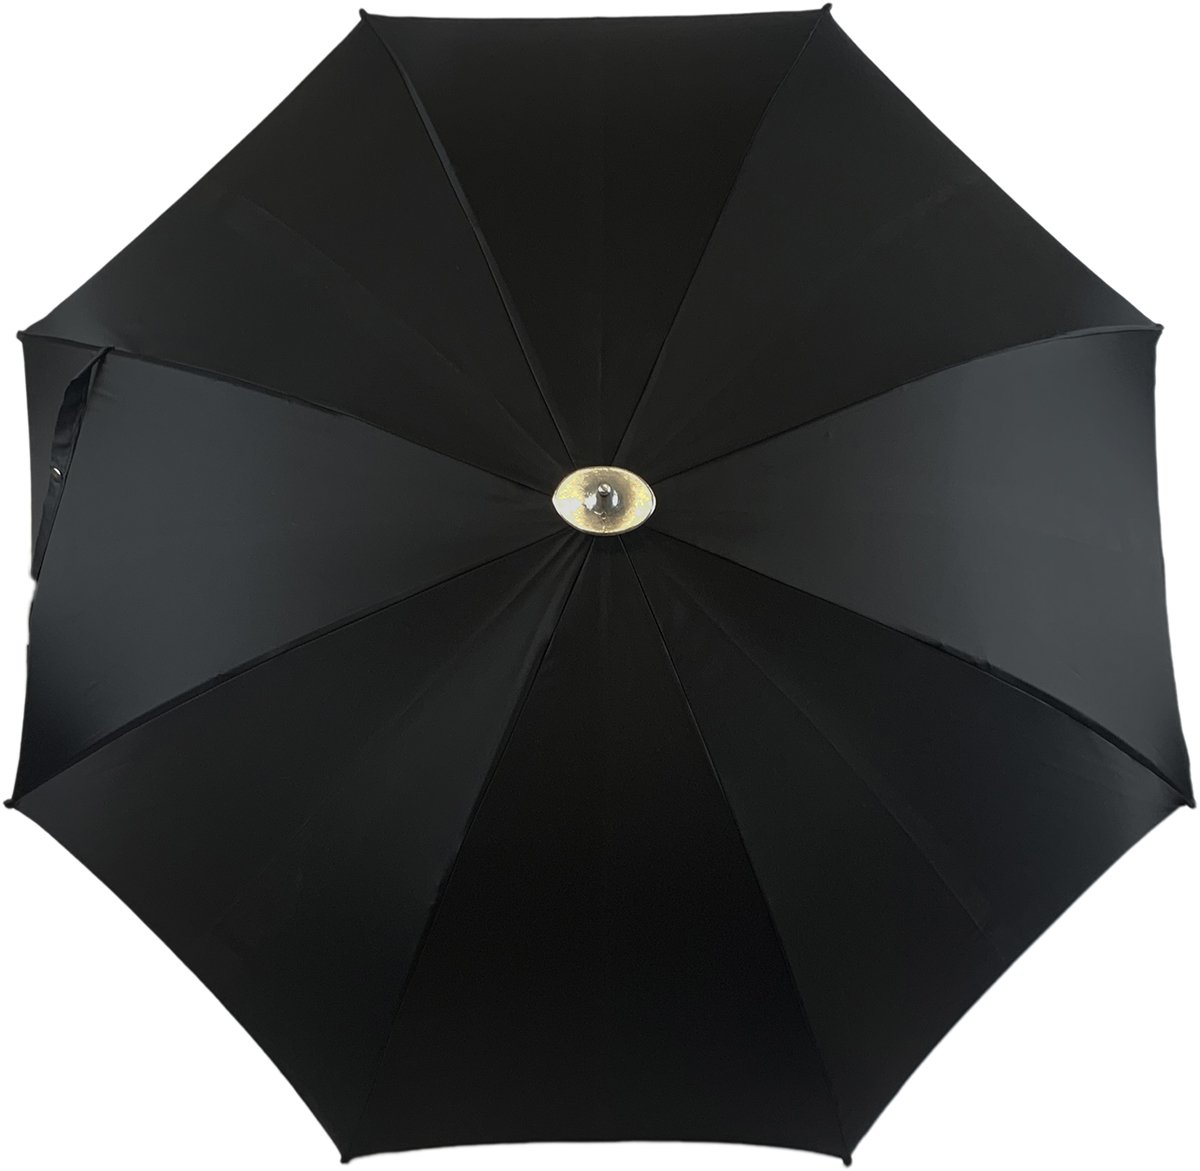 Handcrafted Leather Seat Umbrella - Black Color - IL MARCHESATO LUXURY UMBRELLAS, CANES AND SHOEHORNS